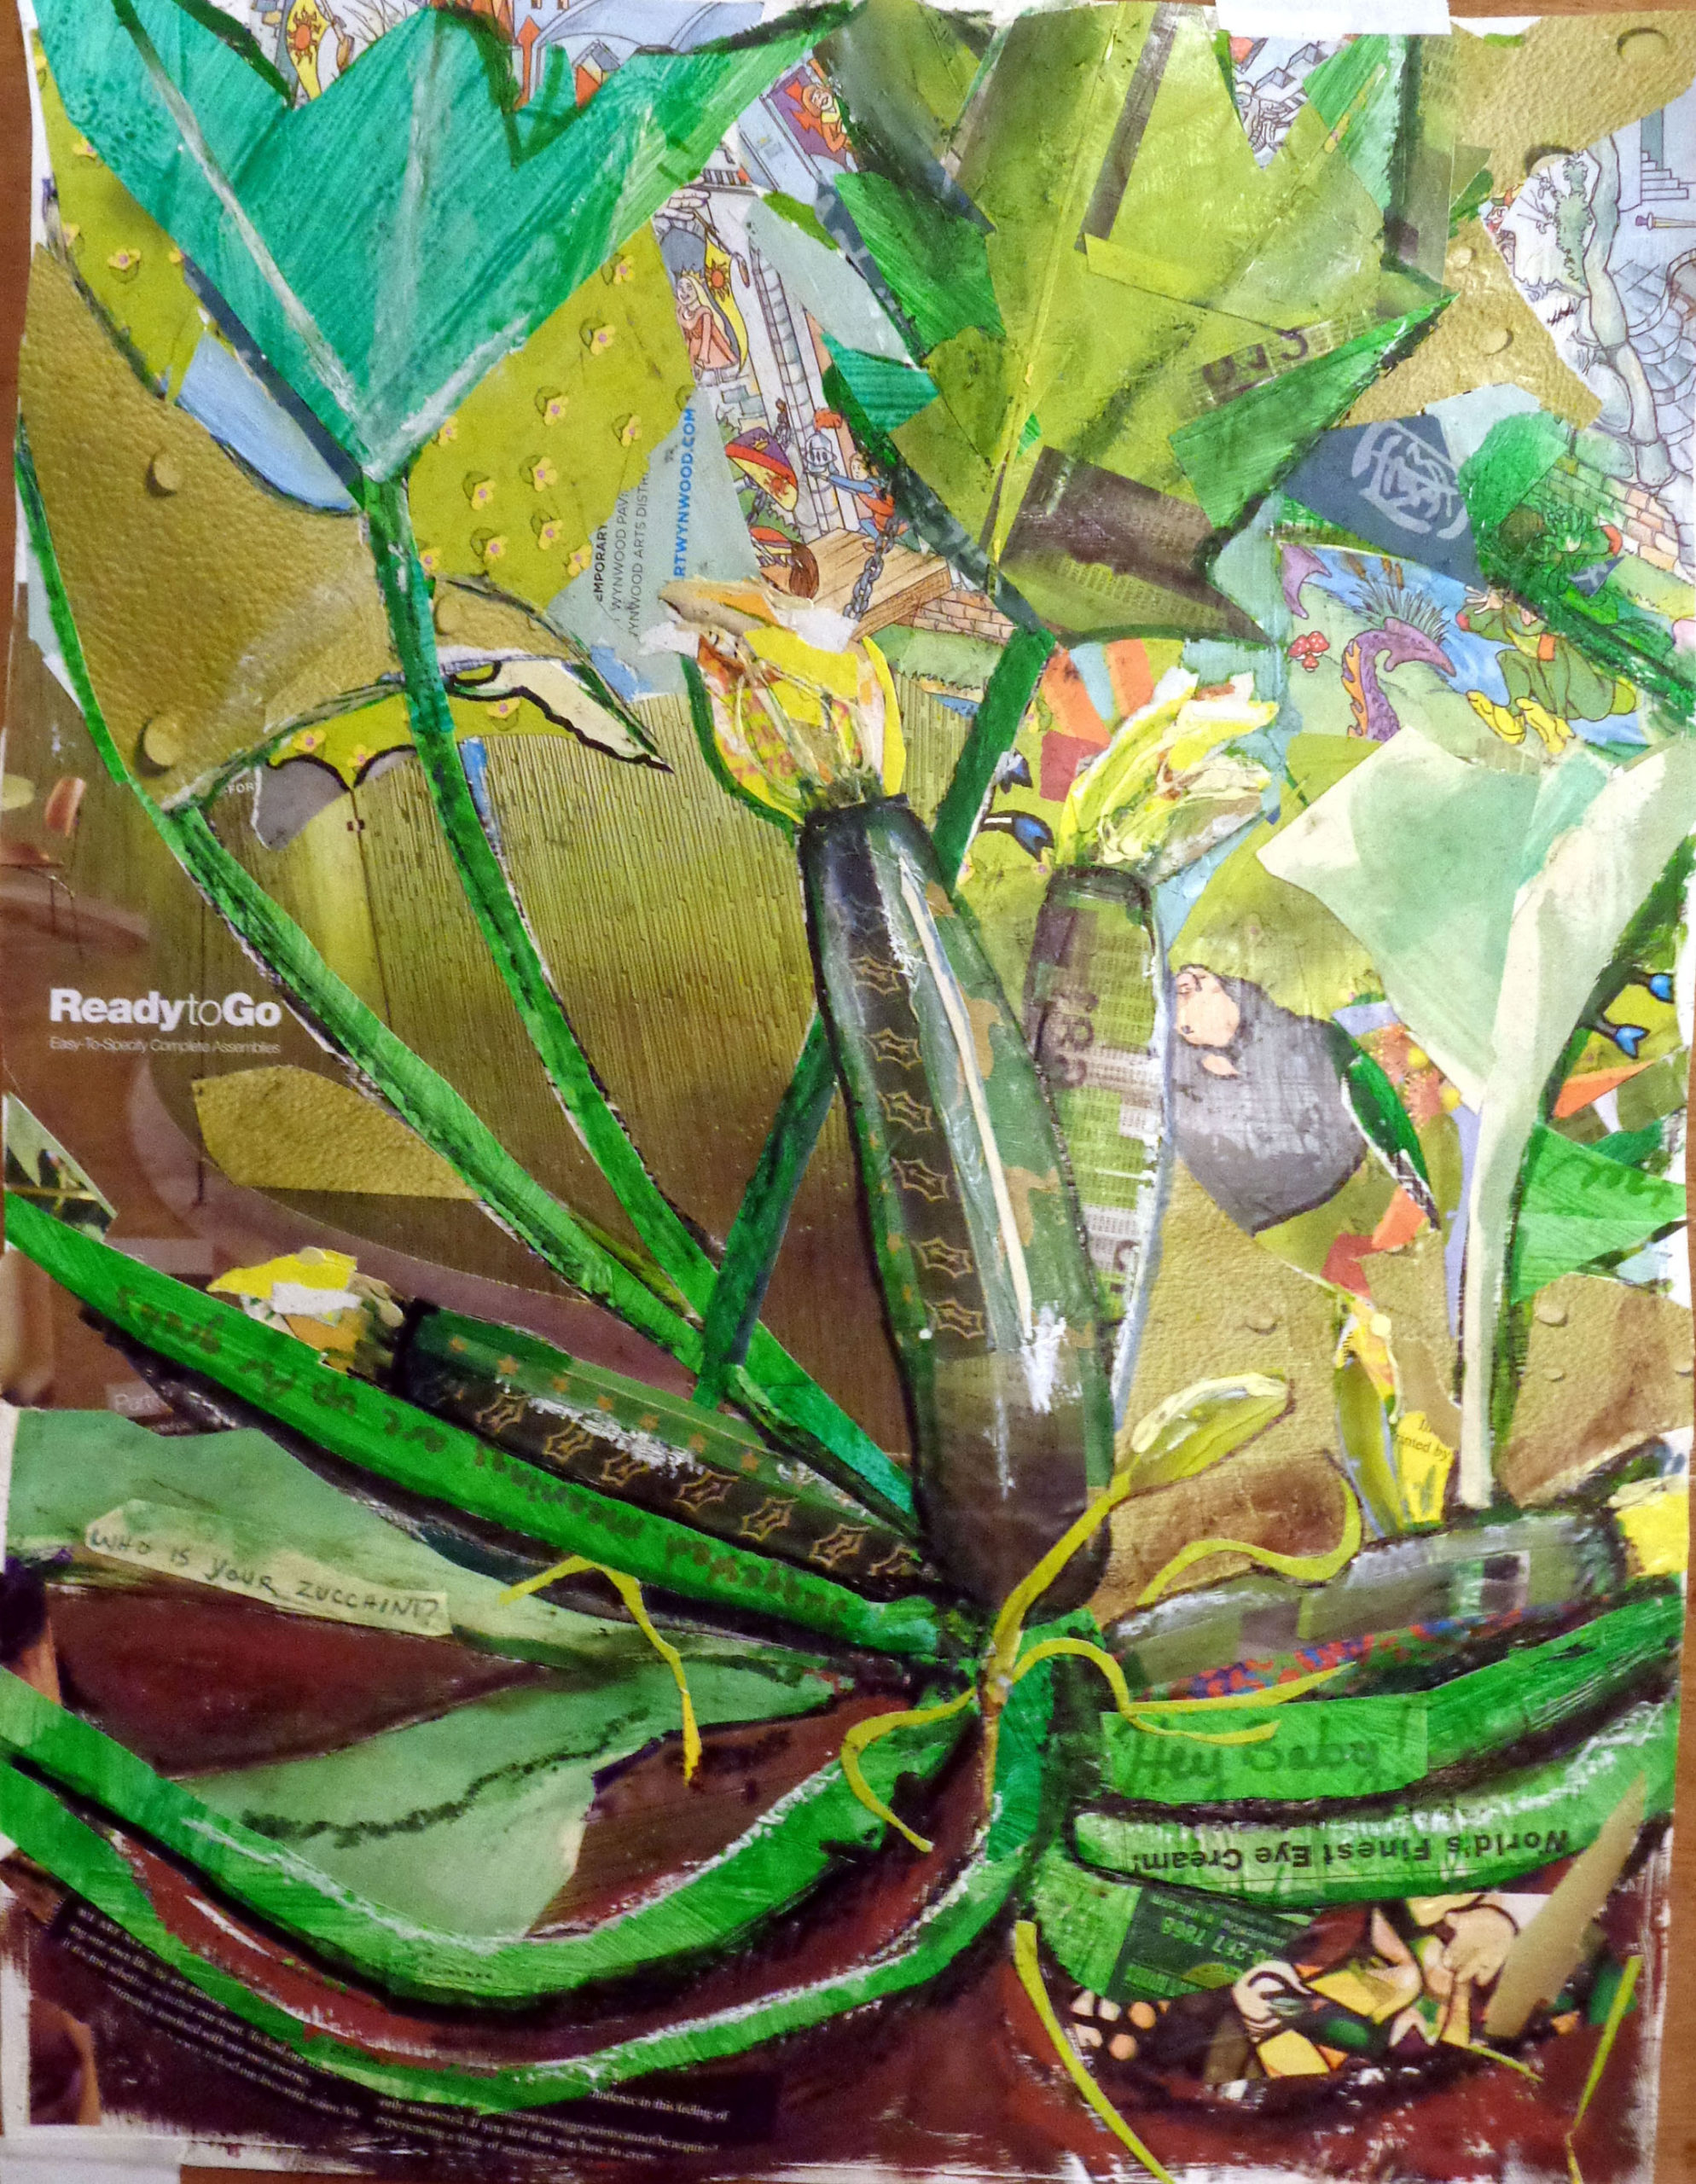 Who is Your Zucchini by Kathryn DeMarco, collage